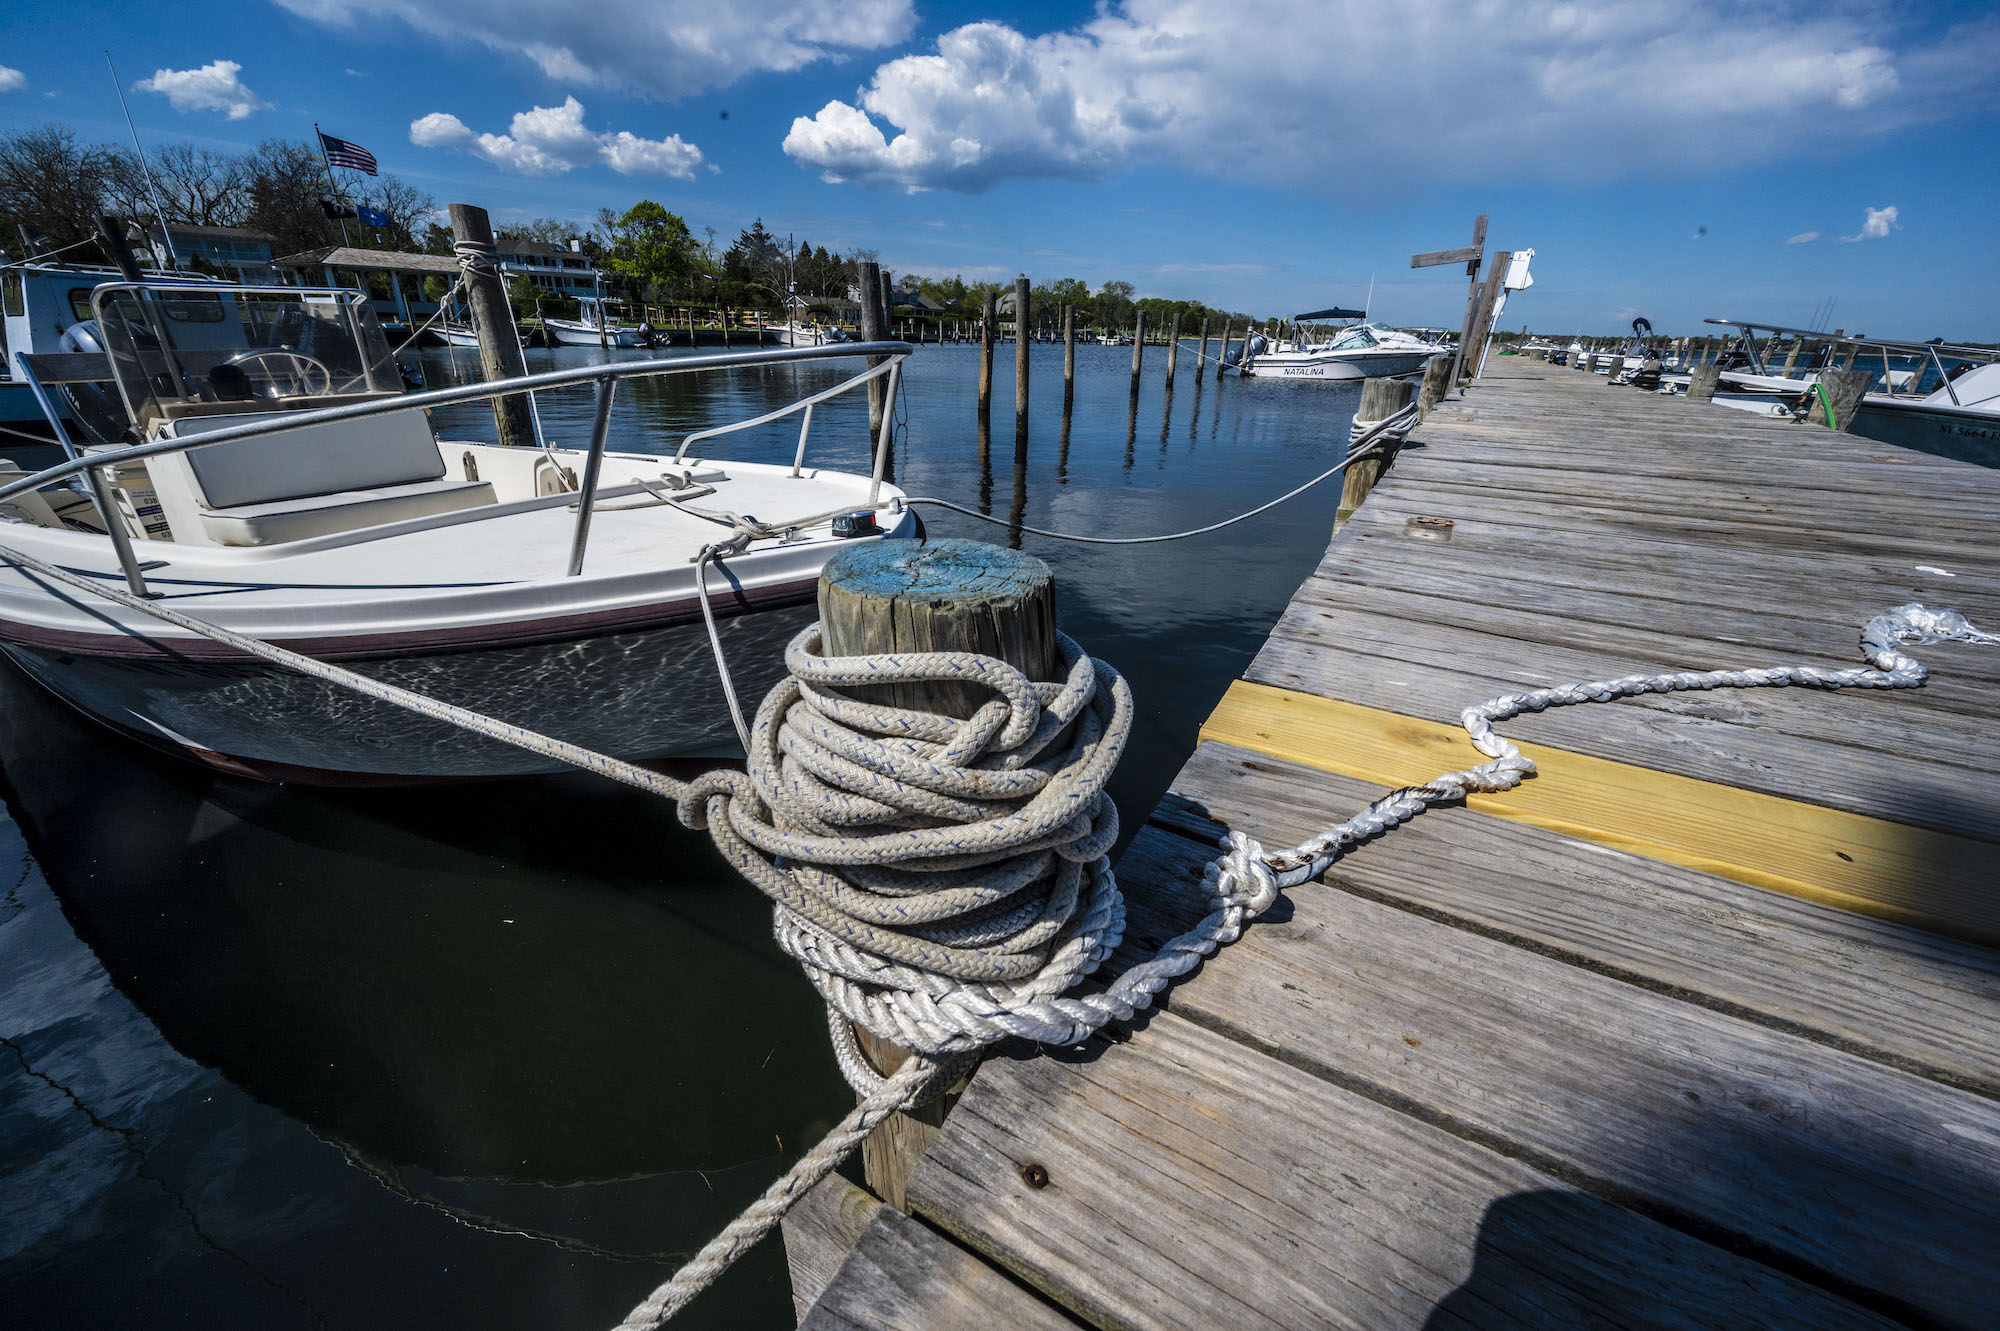 A white center-console boat is docked at Bellport Marina in Bellport Village, New York, on May 15, 2021